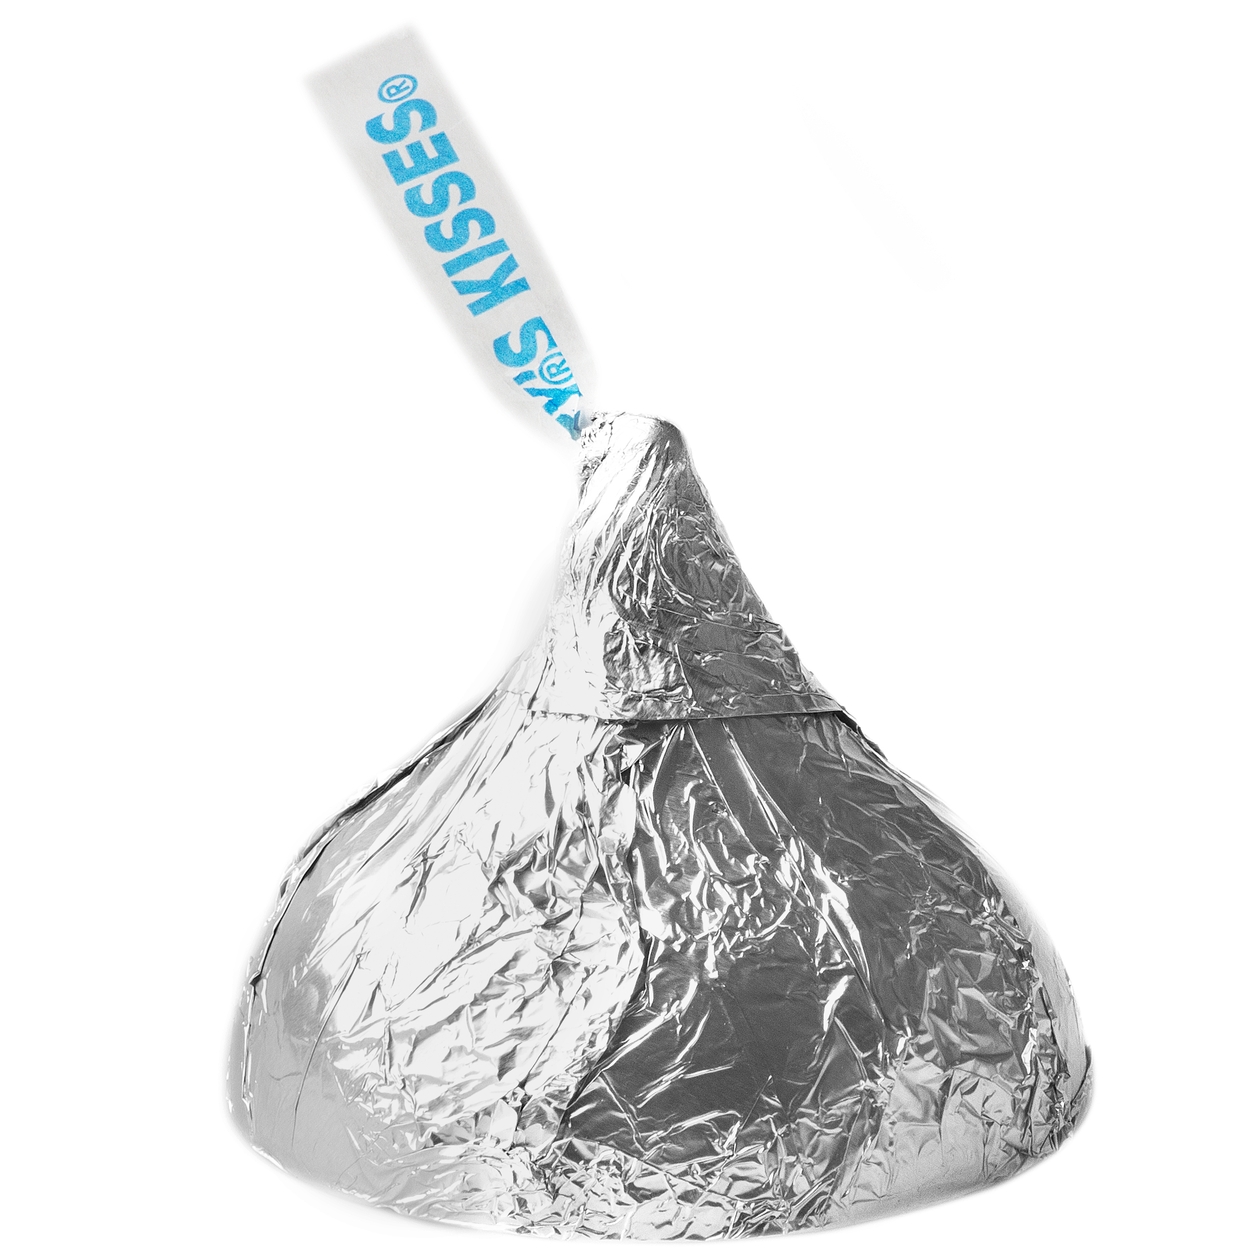 7-Ounce Giant Hershey's Milk Chocolate Kiss Gift Box • Oh! Nuts®